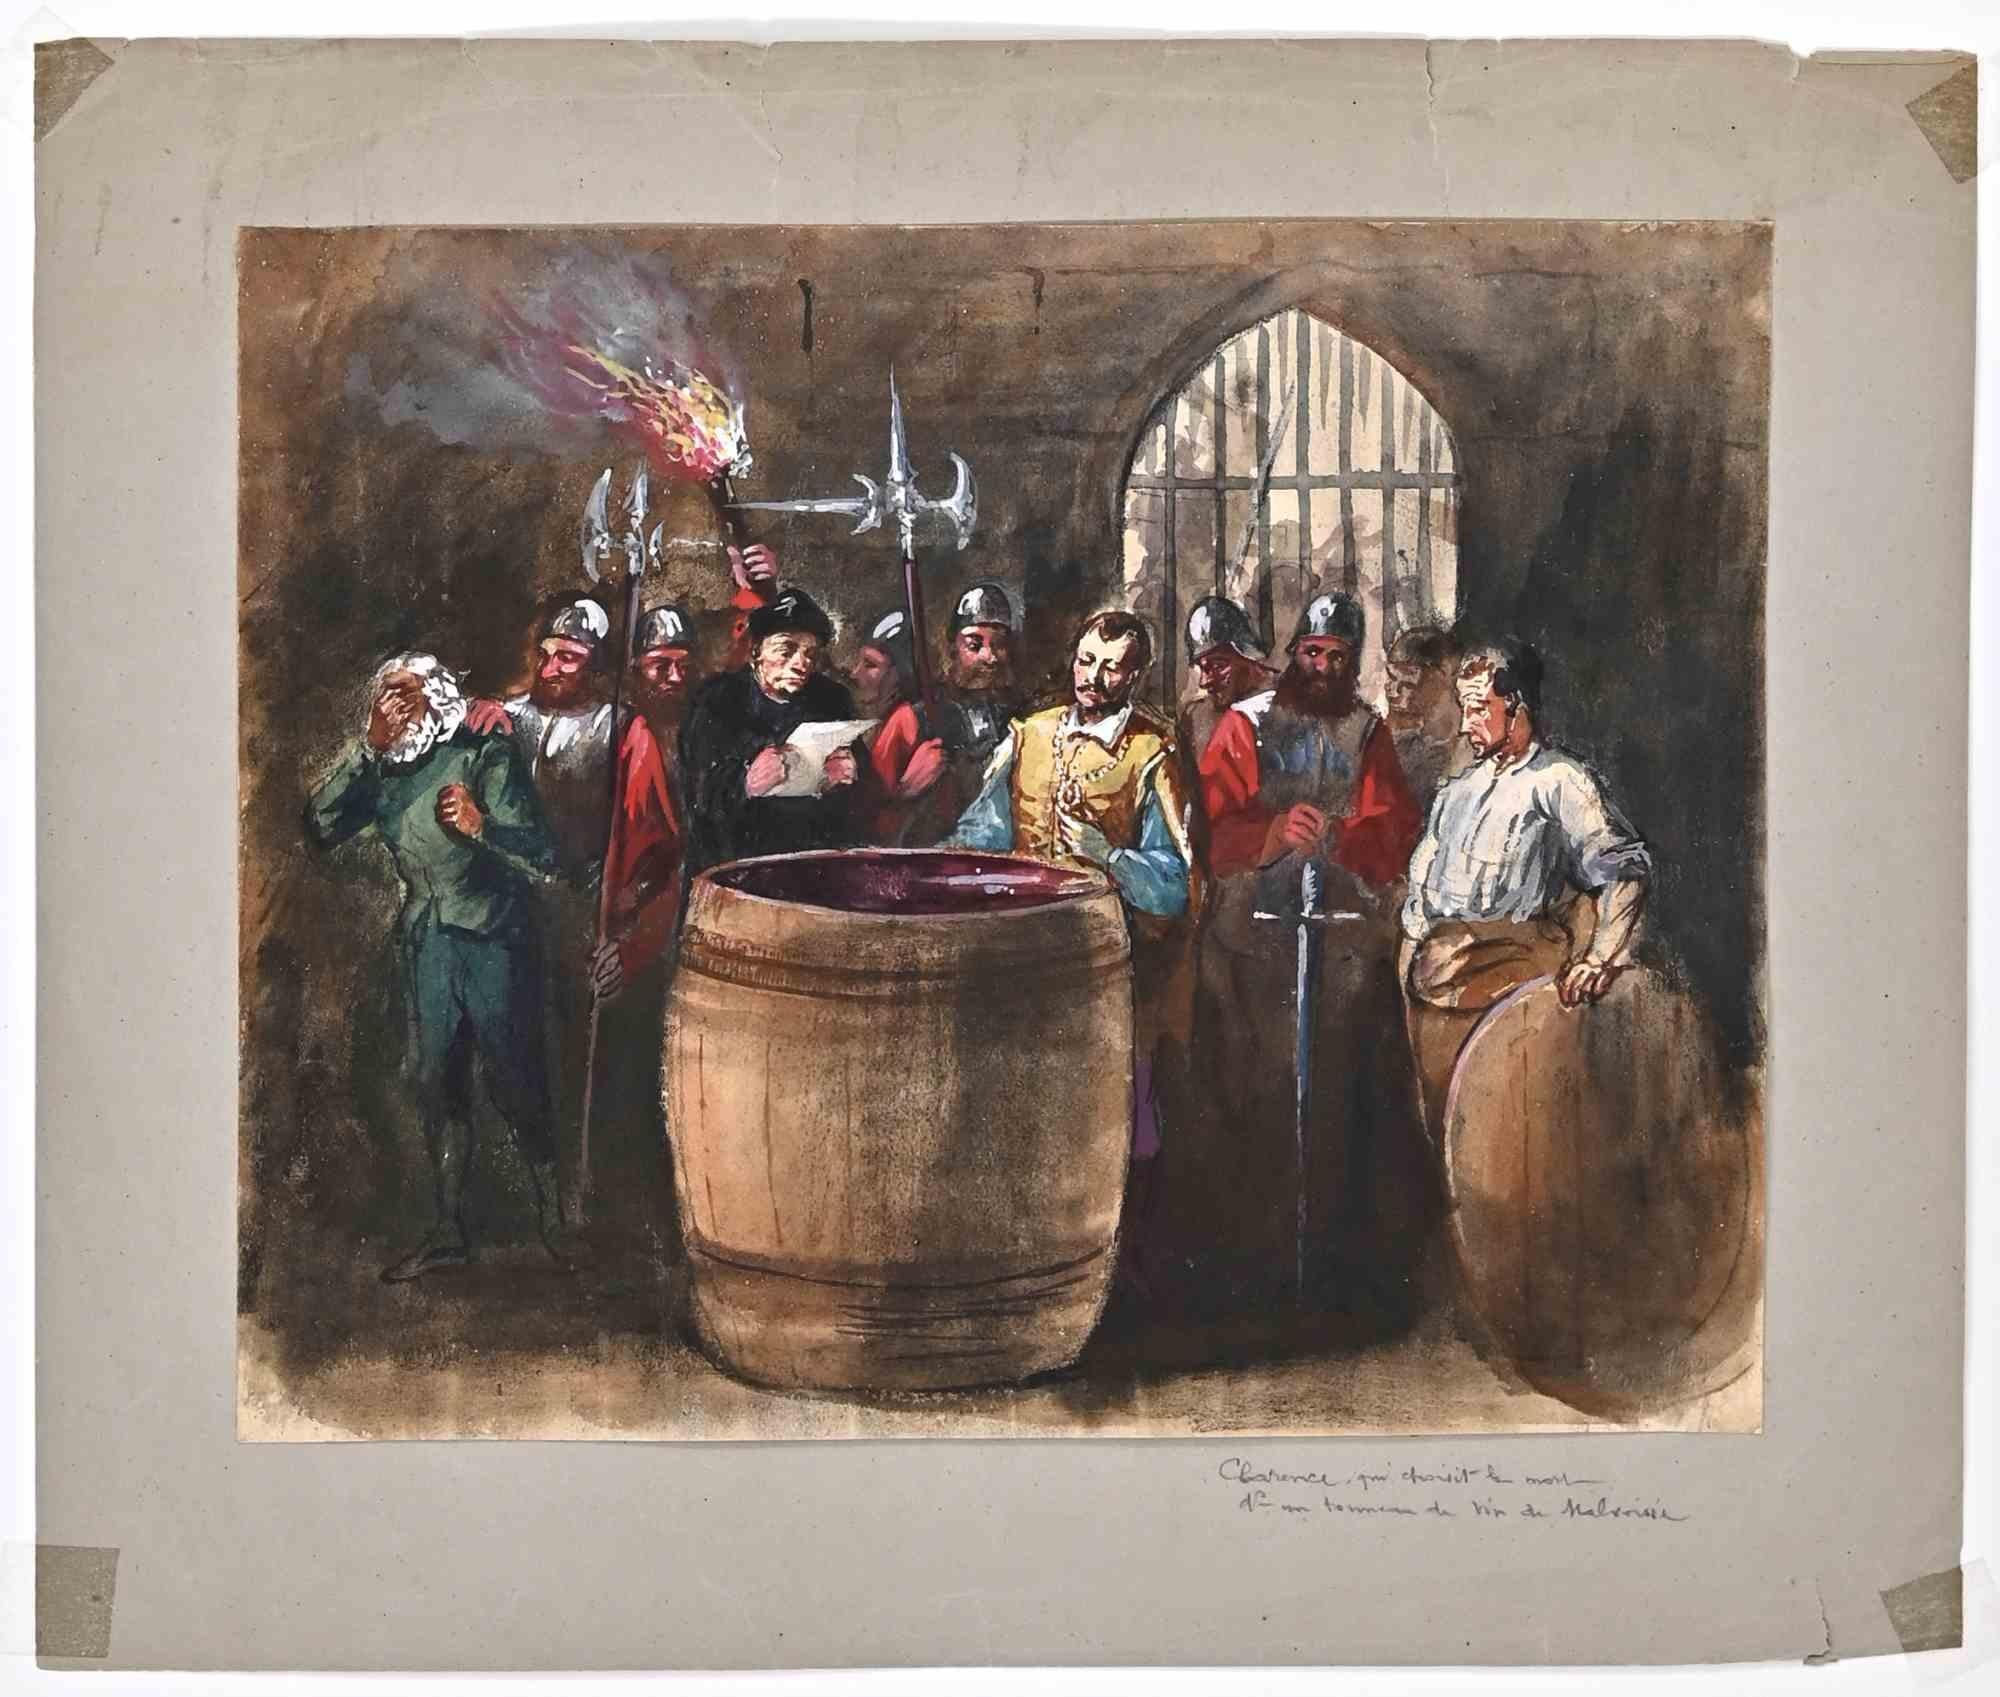 Richard III is an original ink and watercolor drawing realized by Charles Amelot (1759-1830).

Good condition, included a white cardboard passpartout (37.5x55 cm).

The artwork represents Clarence who chooses death in a barrel of Malvoisé.

Charles